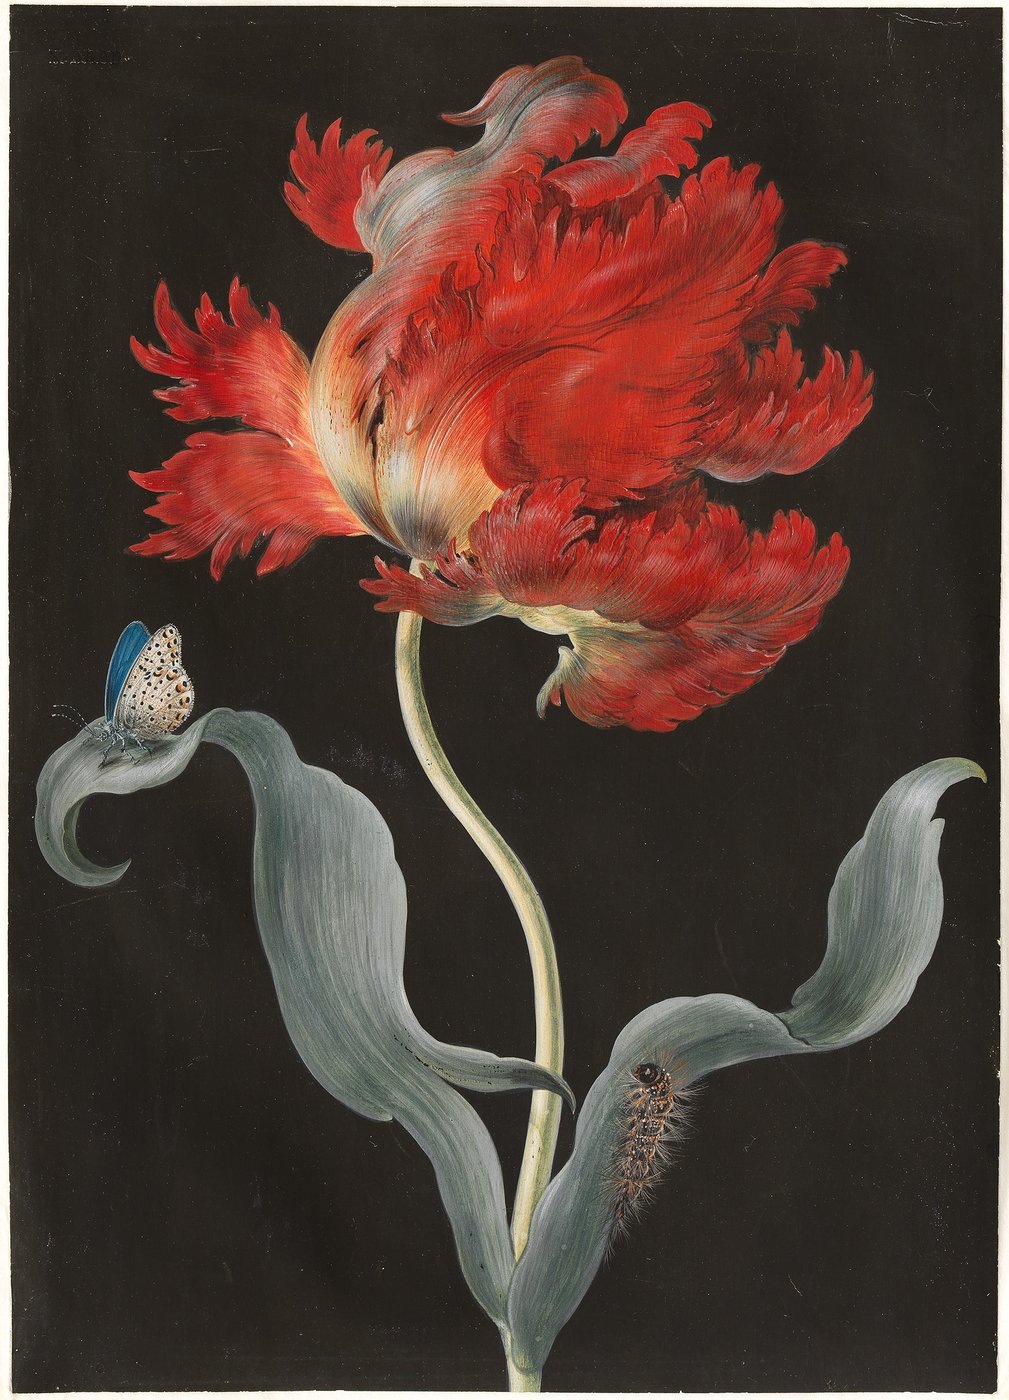 A bright red parrot tulip is depicted on a black background. A butterfly, which can be identified as a blue butterfly, is sitting on one of the two grey-green leaves, a hairy caterpillar is crawling on the other.